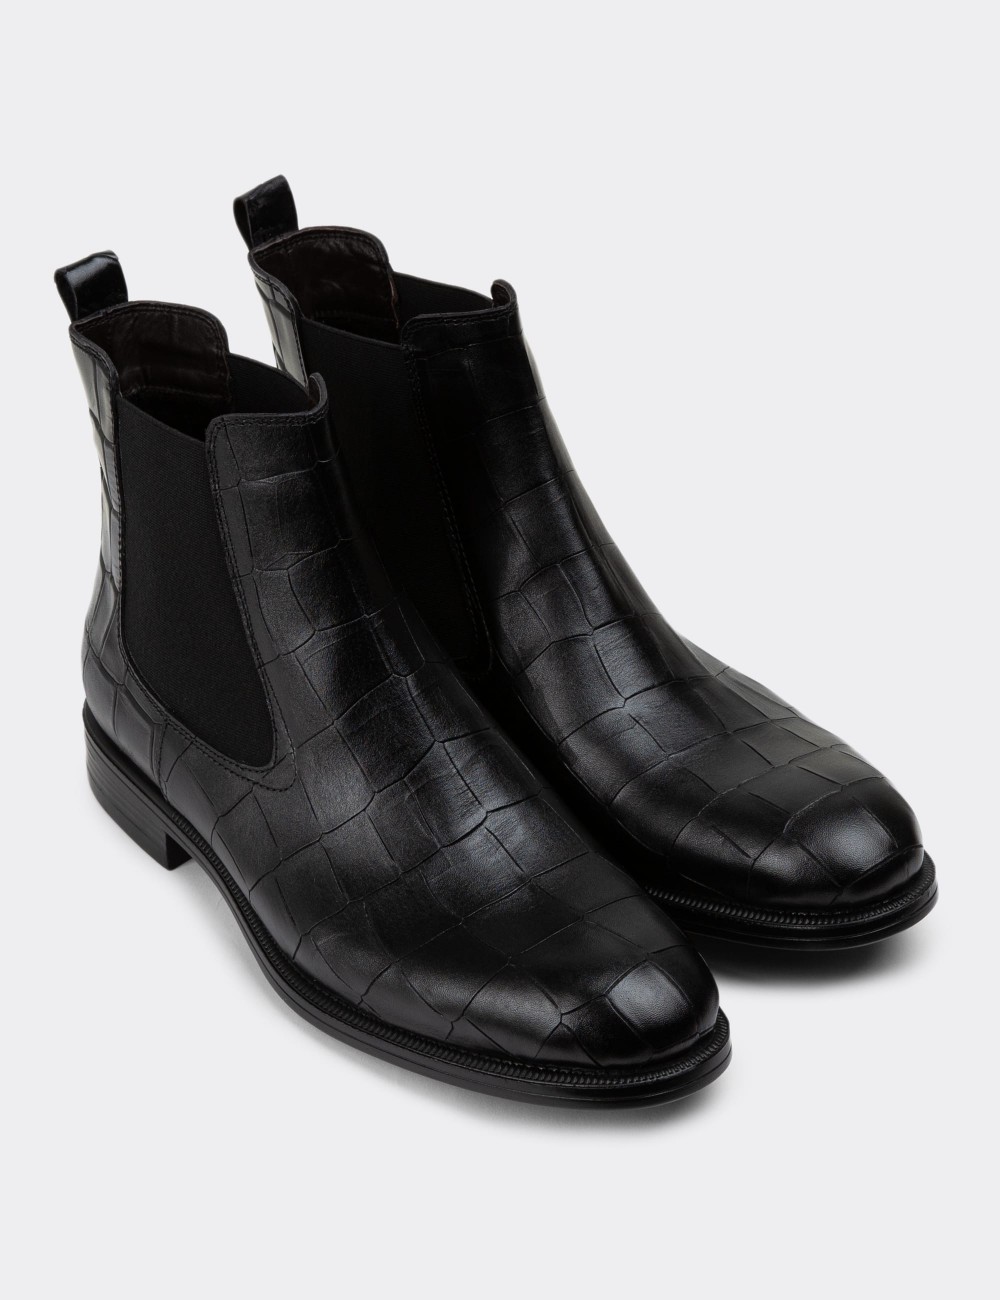 Black Leather Chelsea Boots - 01919MSYHC03